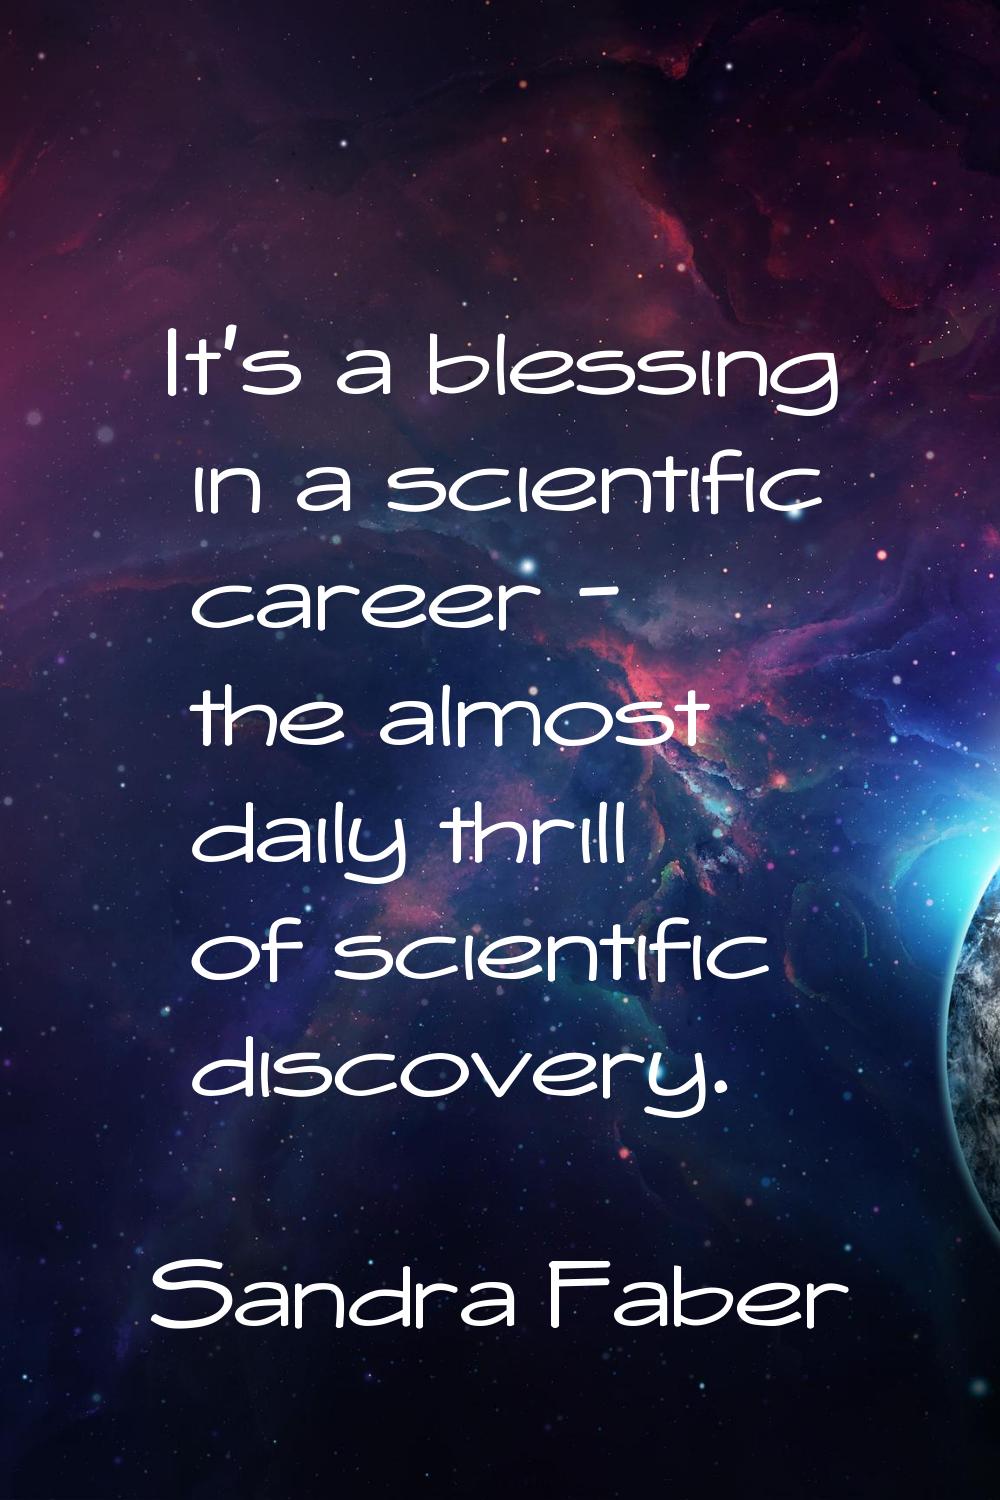 It's a blessing in a scientific career - the almost daily thrill of scientific discovery.